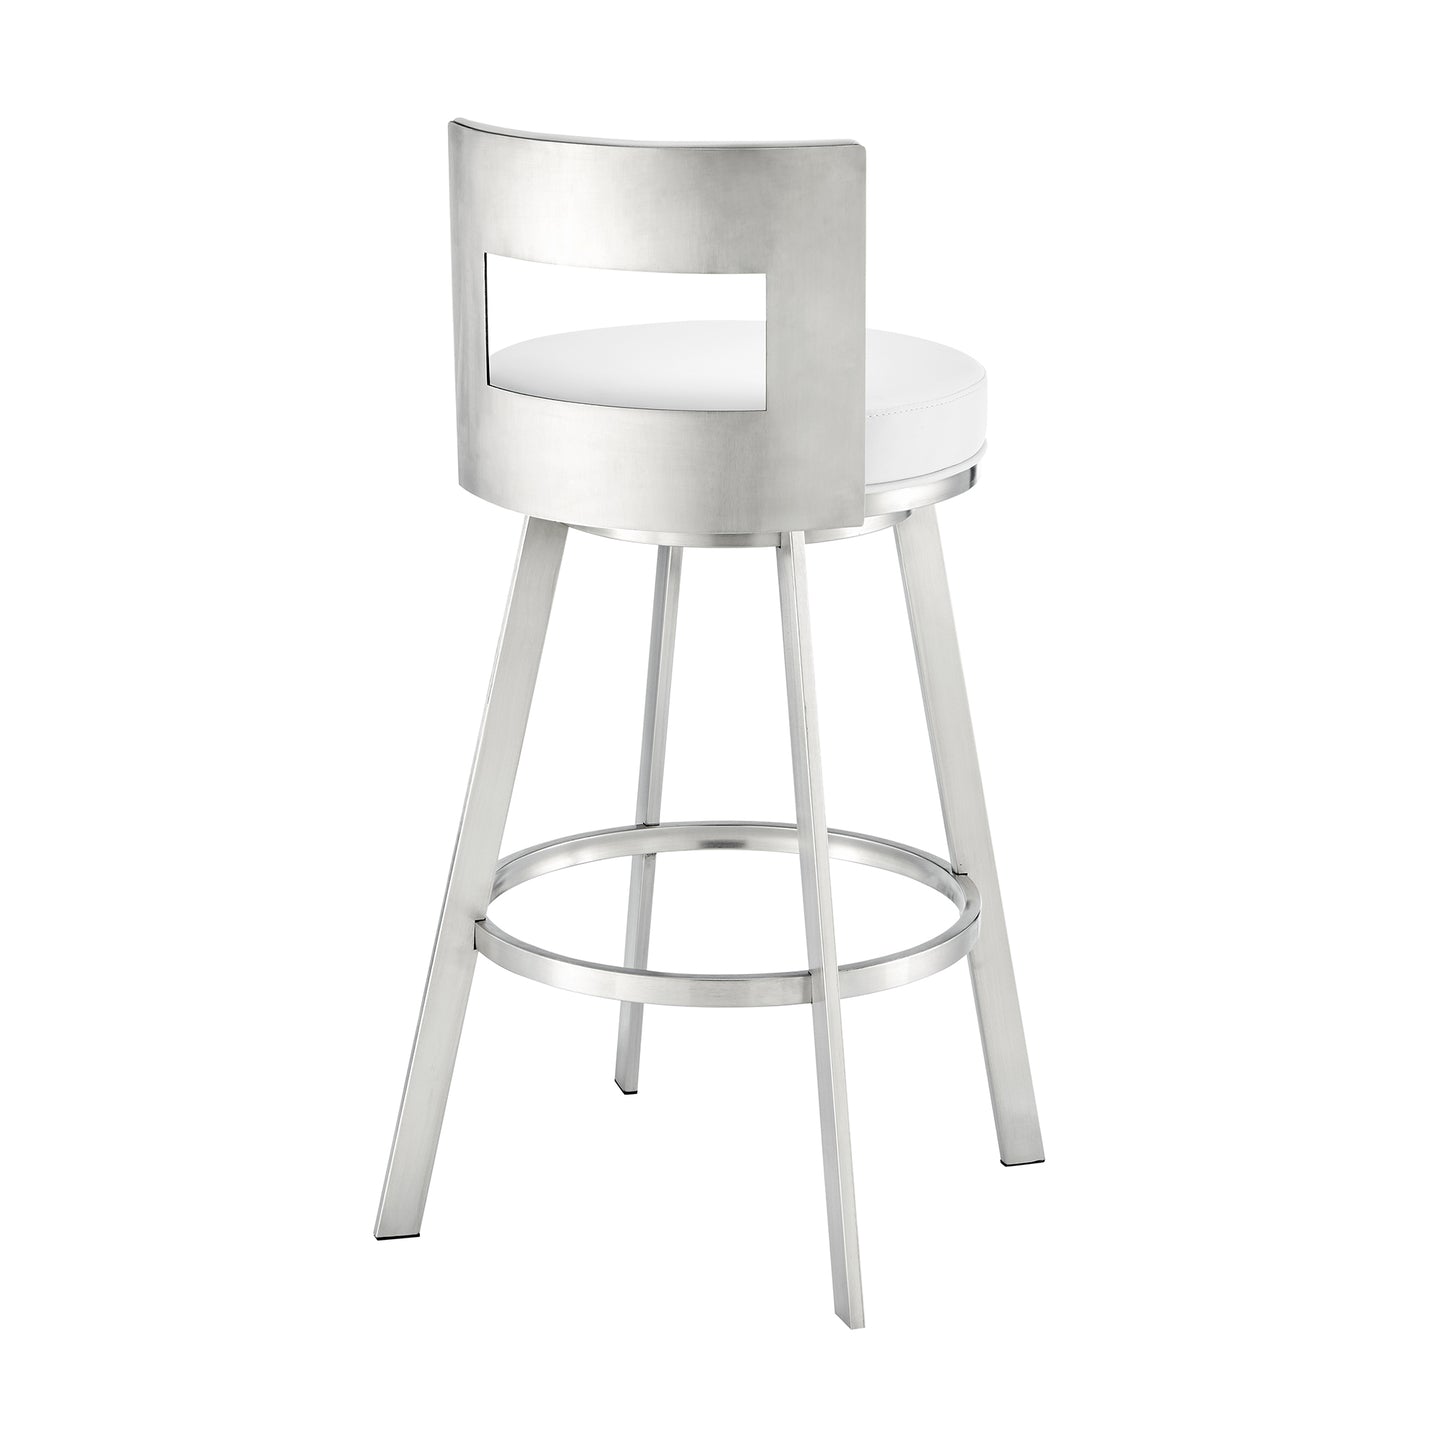 Flynn 26" Swivel Counter Stool in Brushed Stainless Steel with White Faux Leather